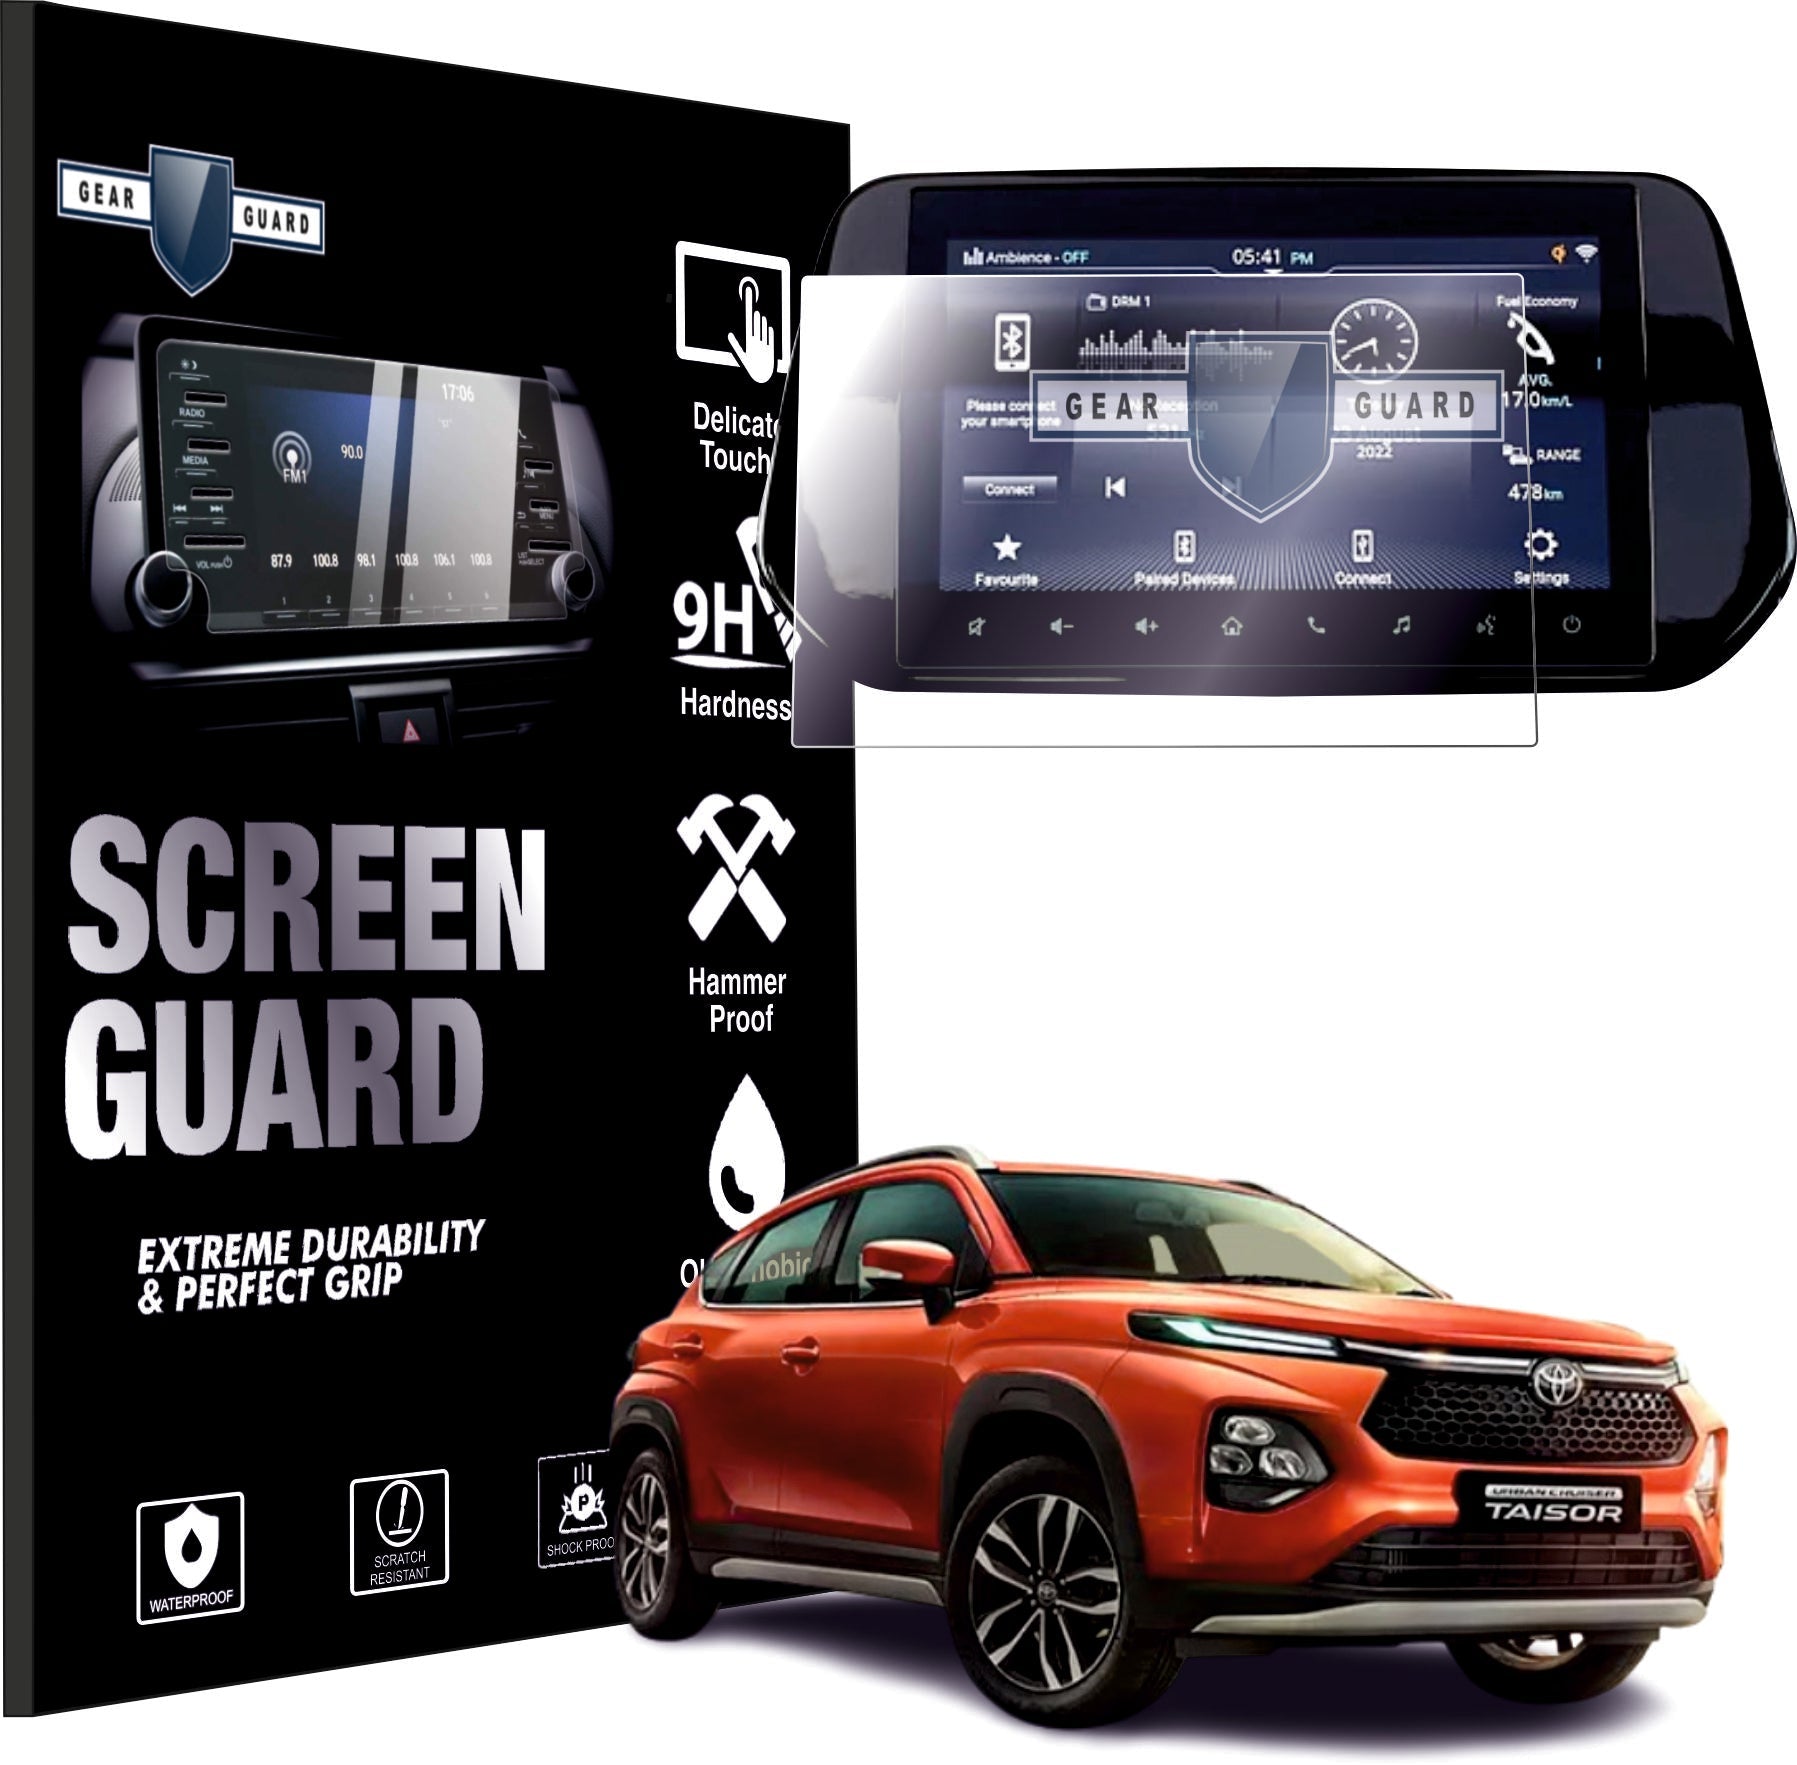 Toyota Taisor Accessories Touch Screen Guard -